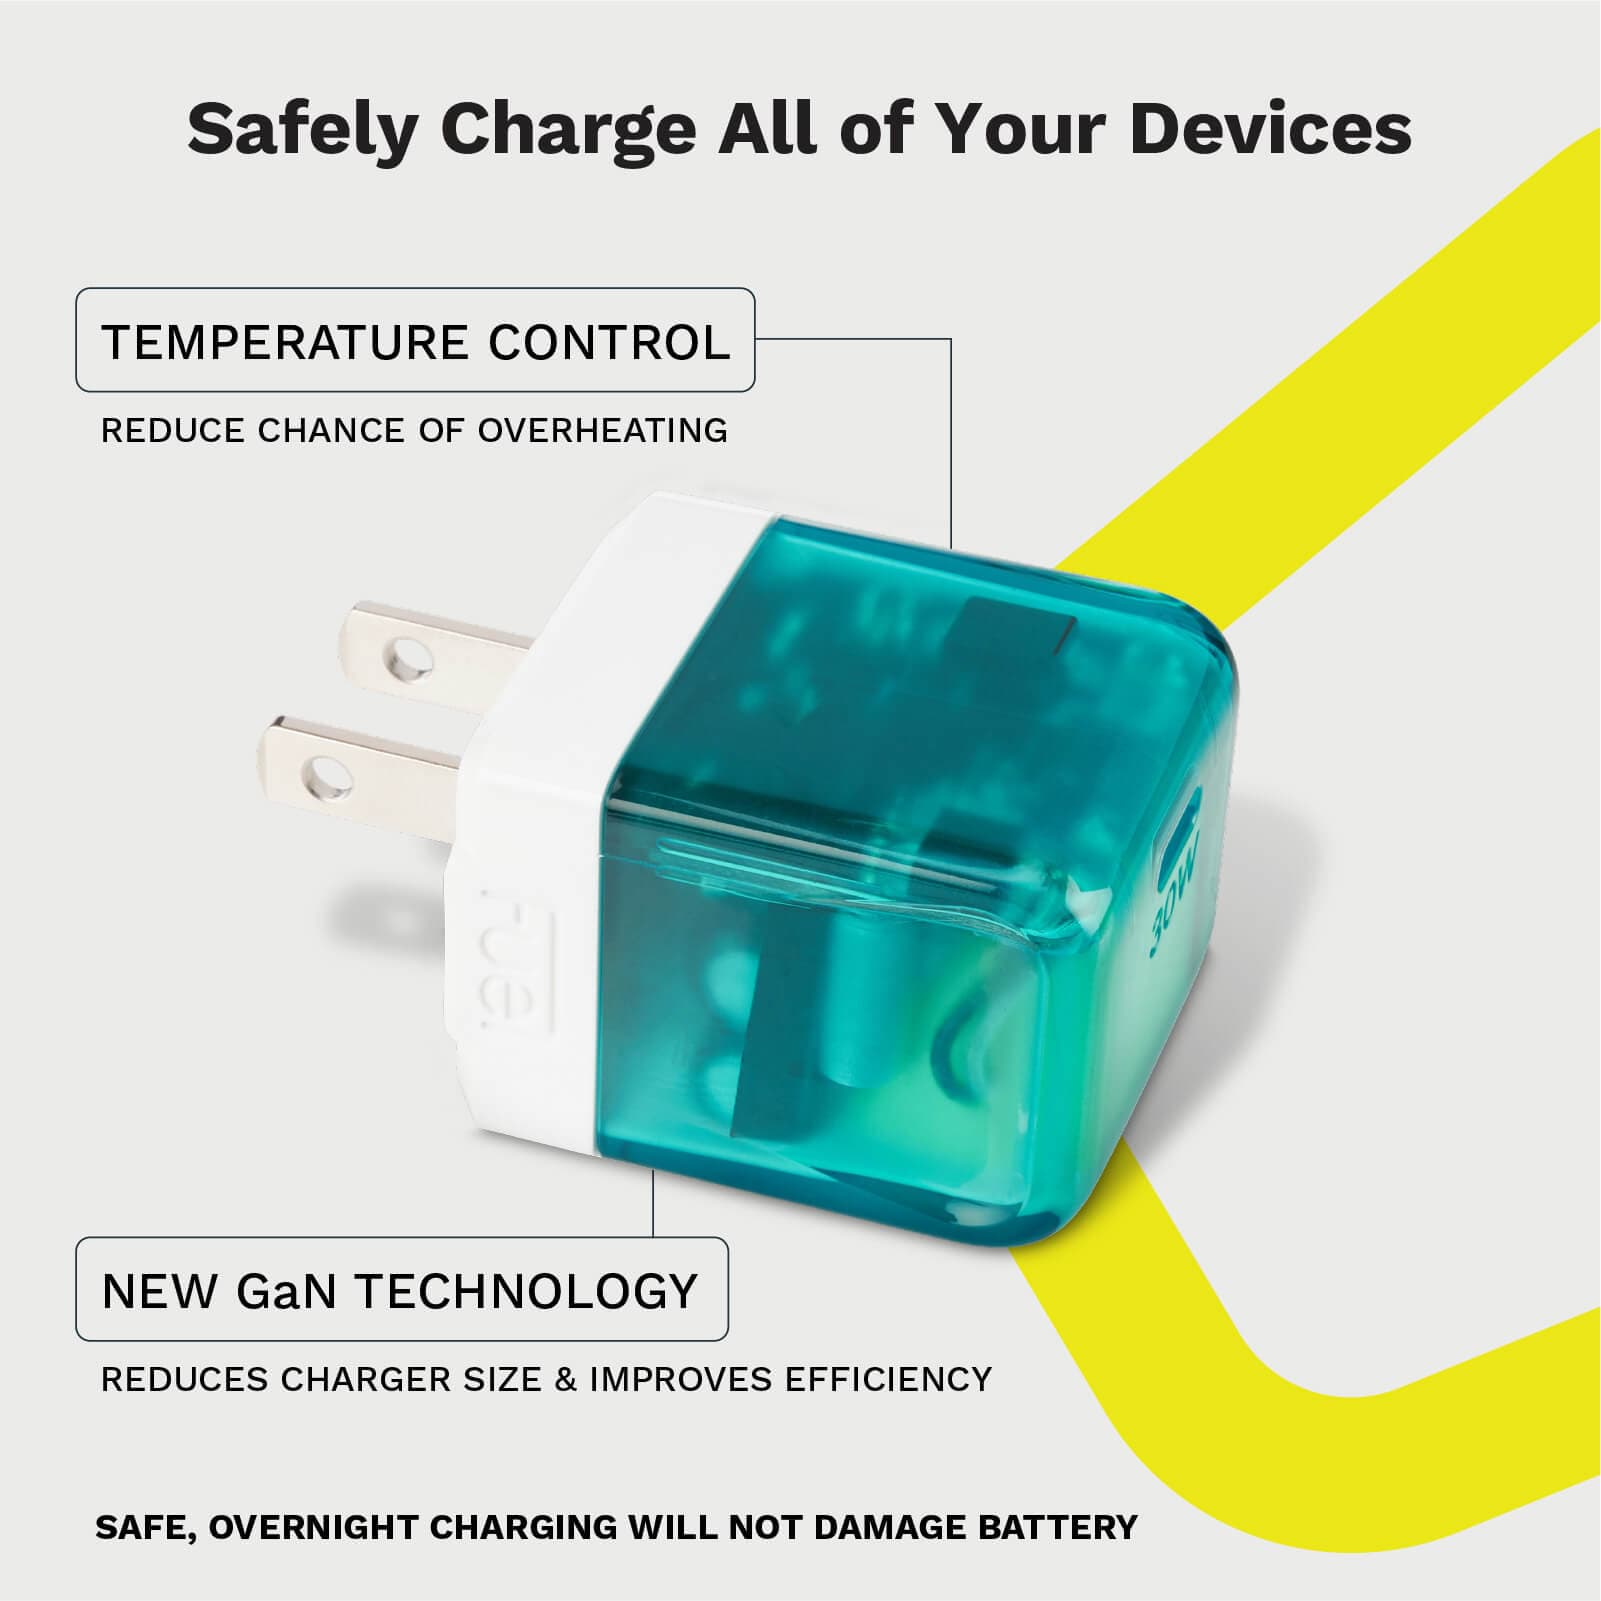 TEMPERATURE CONTROL REDUCE CHANCE OF OVERHEATING. NEW GaN TECHNOLOGY REDUCES CHARGER SIZE AND IMPROVES EFFICIENCY. SAFE, OVERNIGHT CHARGING WILL NOT DAMAGE BATTERY.